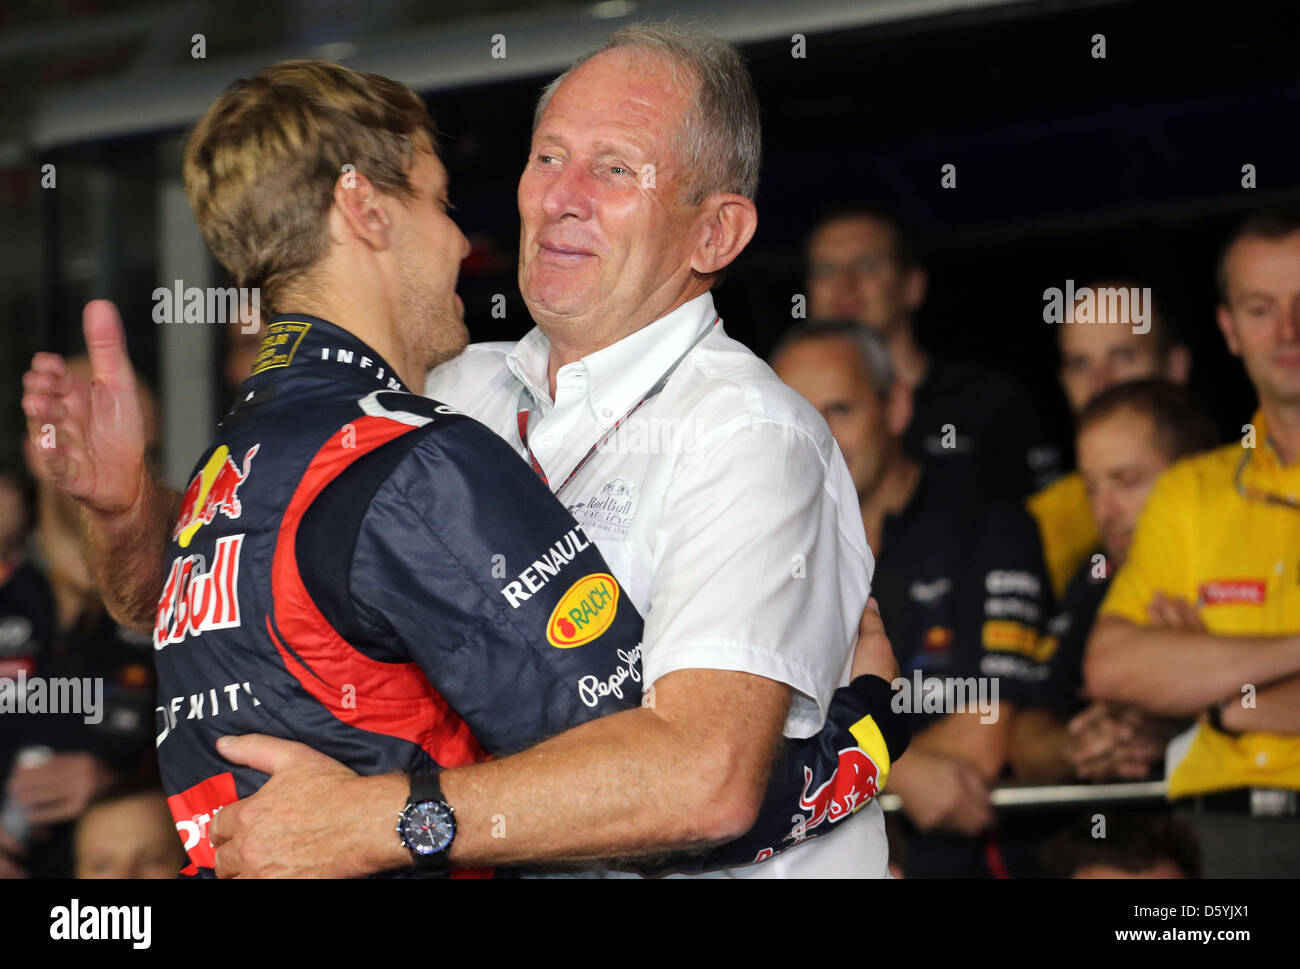 German Formula One driver Sebastian Vettel of Red Bull celebrates with the chief motorsport of Red Bull, Austrian Helmut Marko, after winning the Formula One Grand Prix of India at the race track Buddh International Circuit, Greater Noida, India, 28 October 2012. Photo: Jens Buettner/dpa  +++(c) dpa - Bildfunk+++ Stock Photo